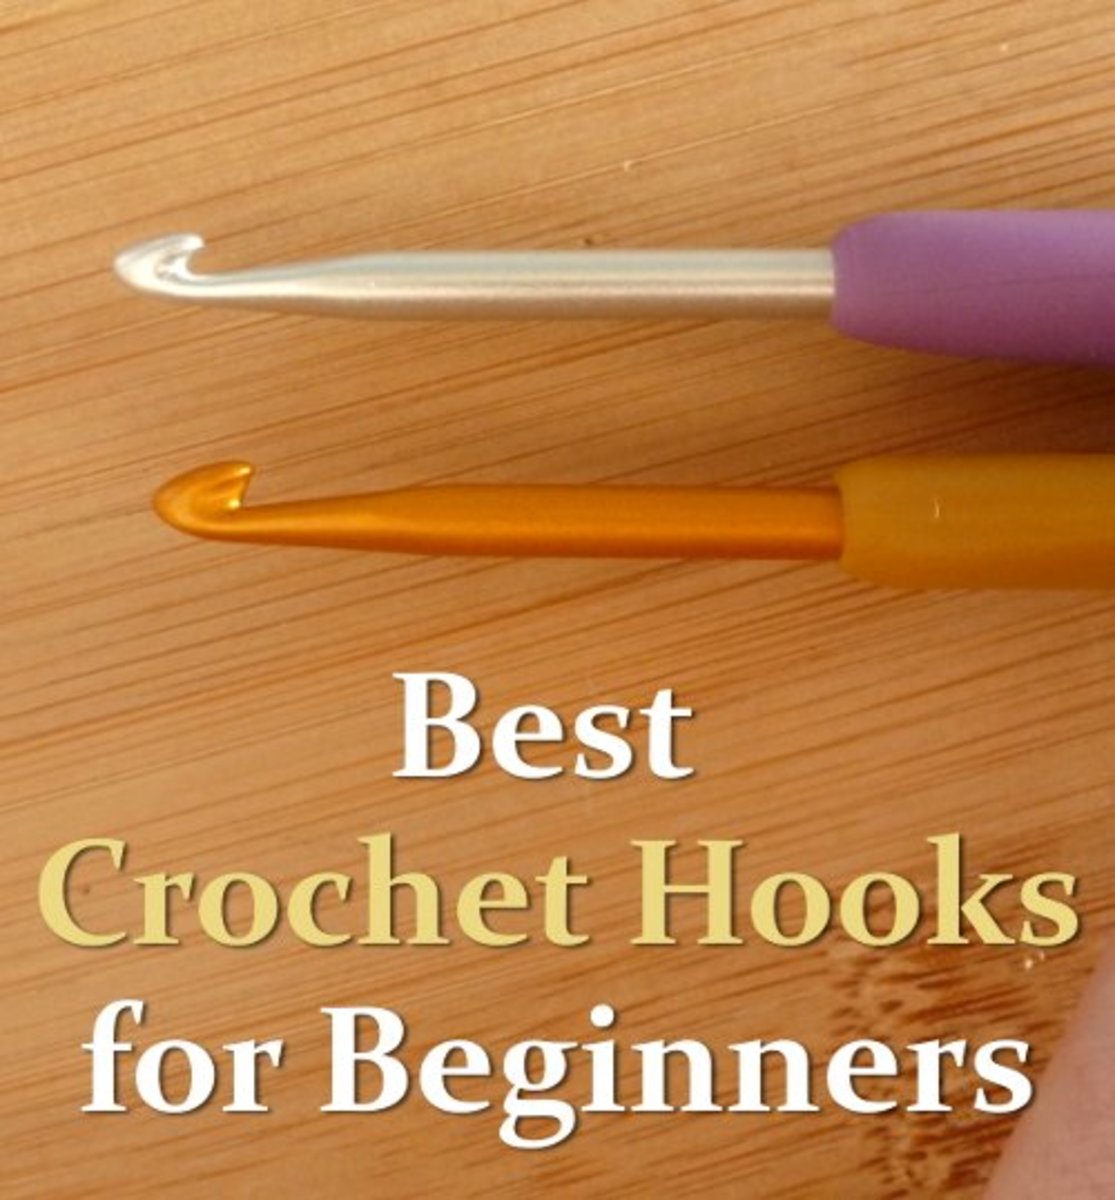 The best crochet hooks and sizes for beginners to use are explained in this guide.